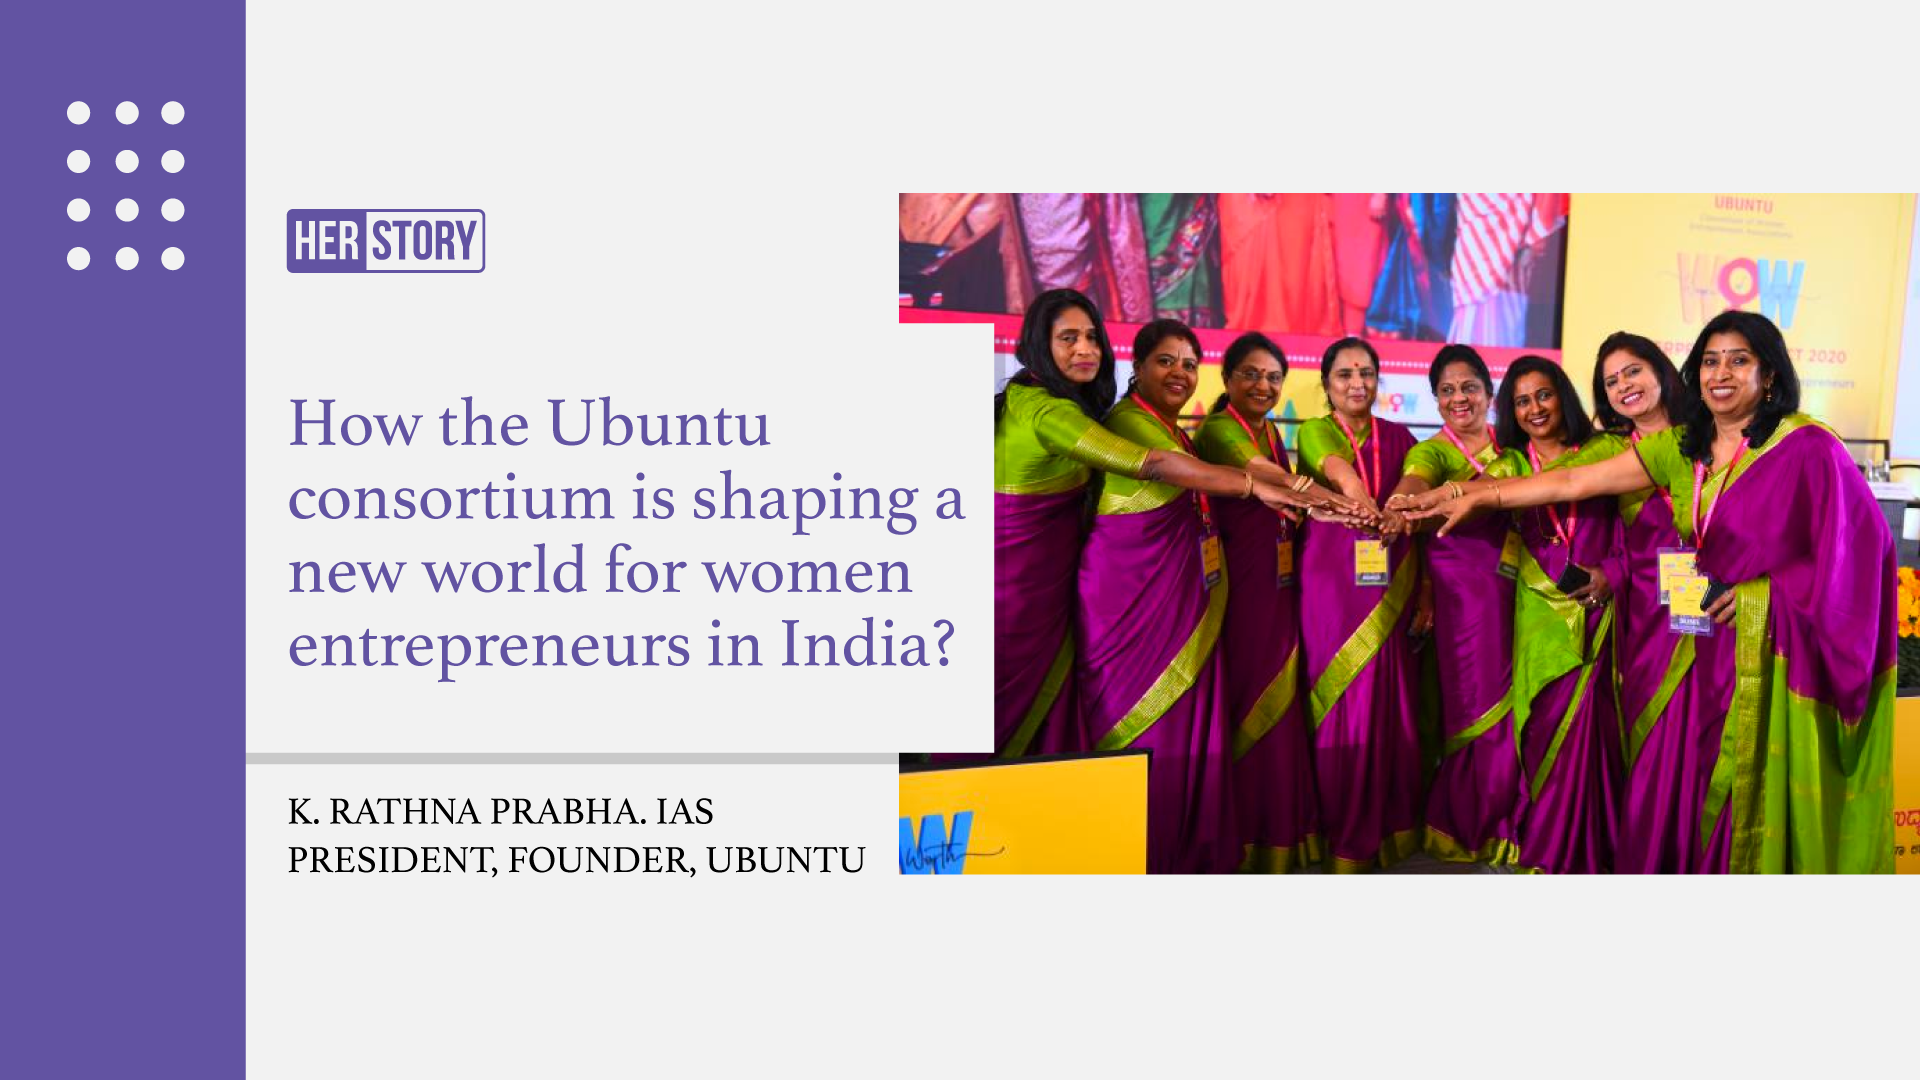 How the Ubuntu consortium is shaping a new world for women entrepreneurs in India
